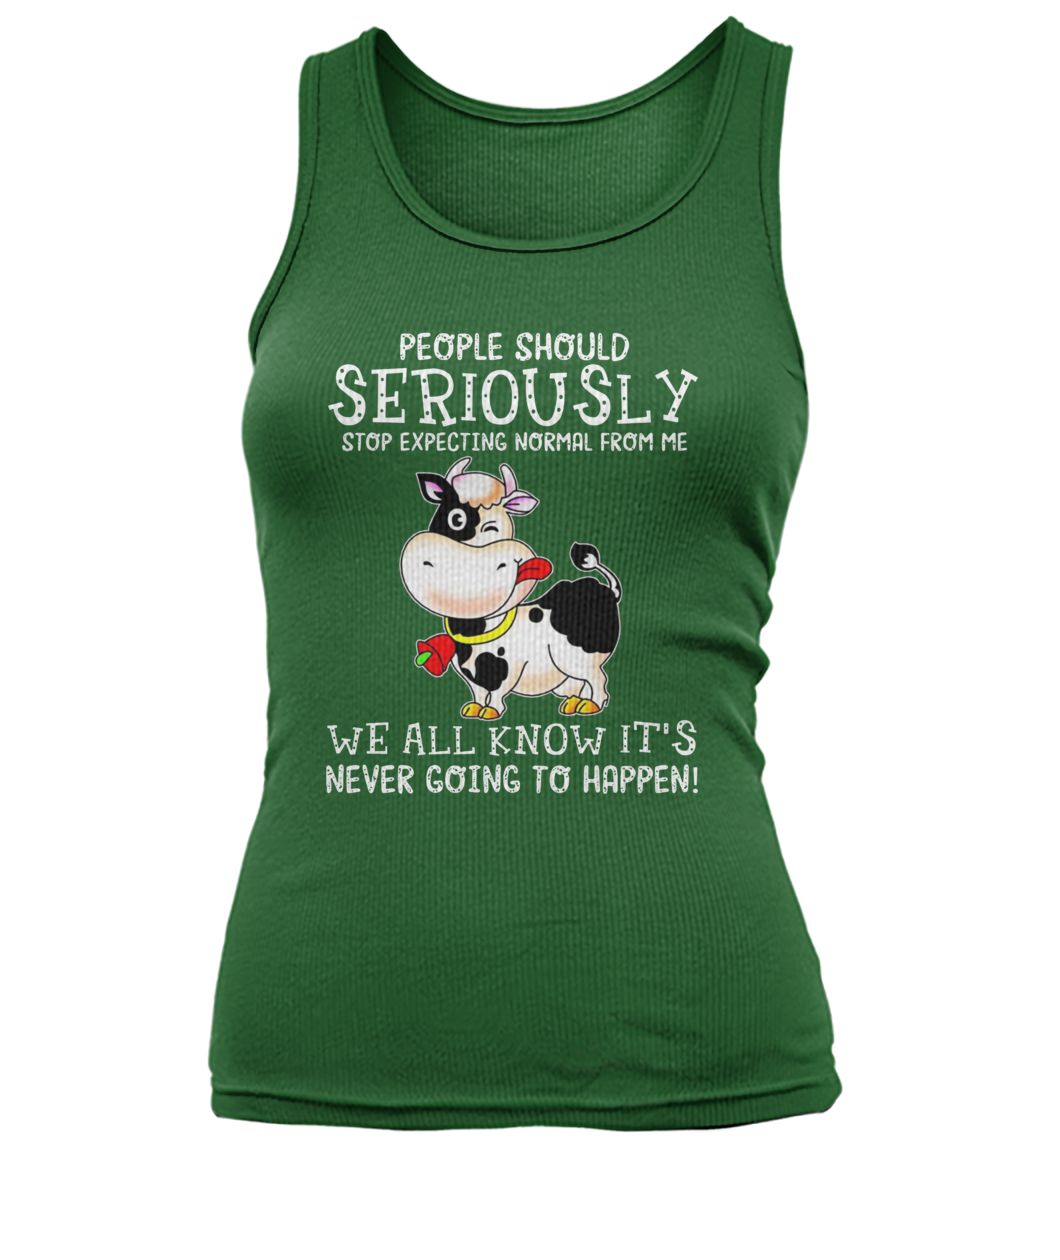 People should seriously stop expecting normal from me cow women's tank top